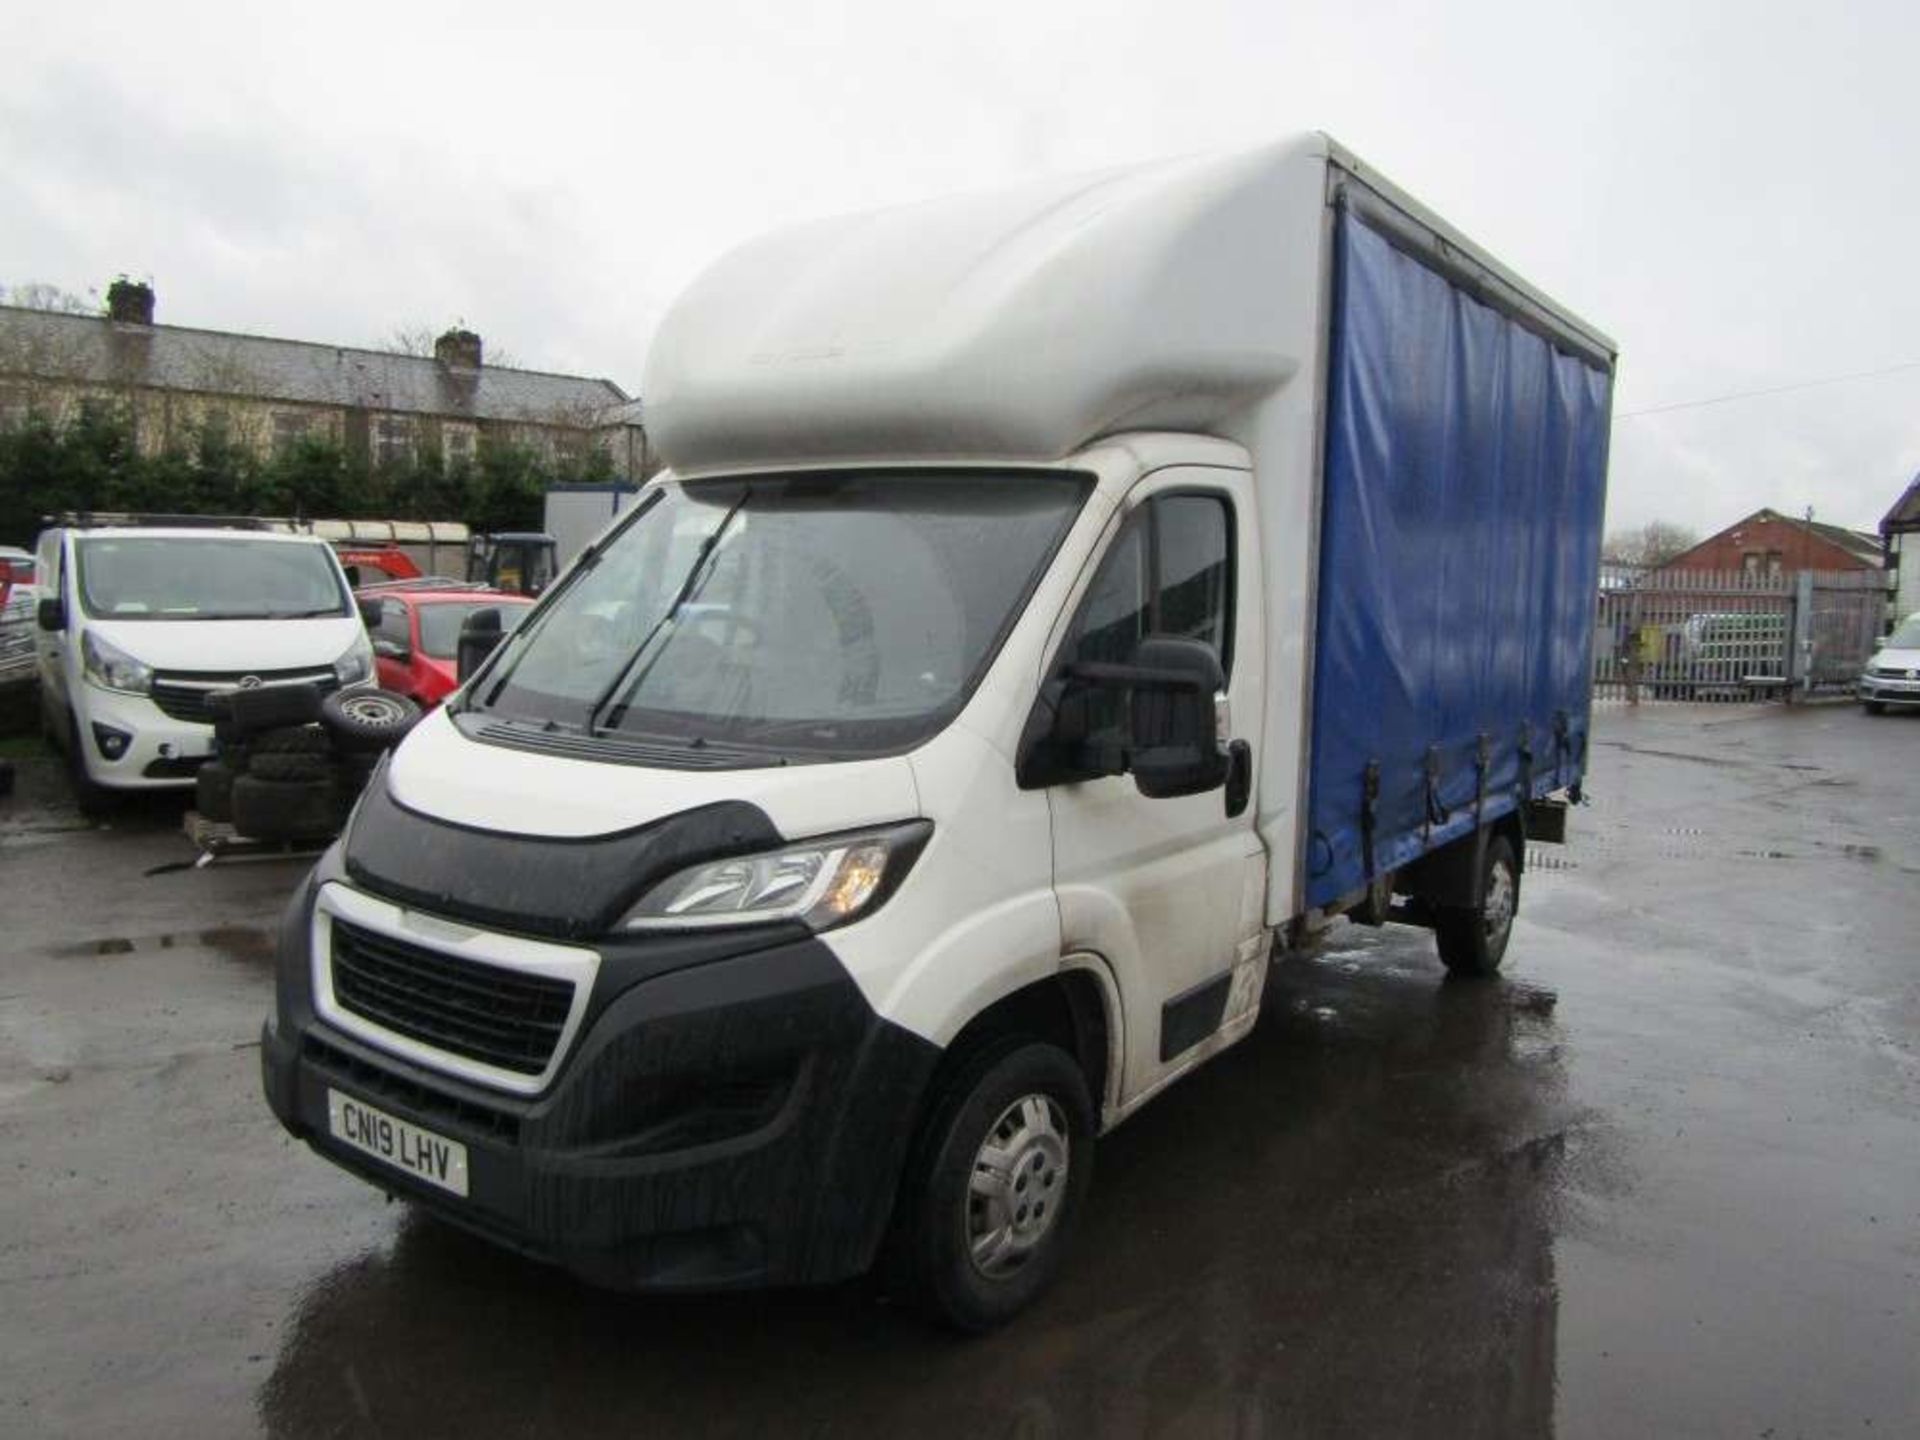 2019 19 reg Peugeot Boxer 335 L3 Blue HDI Curtain Sider - Image 2 of 7